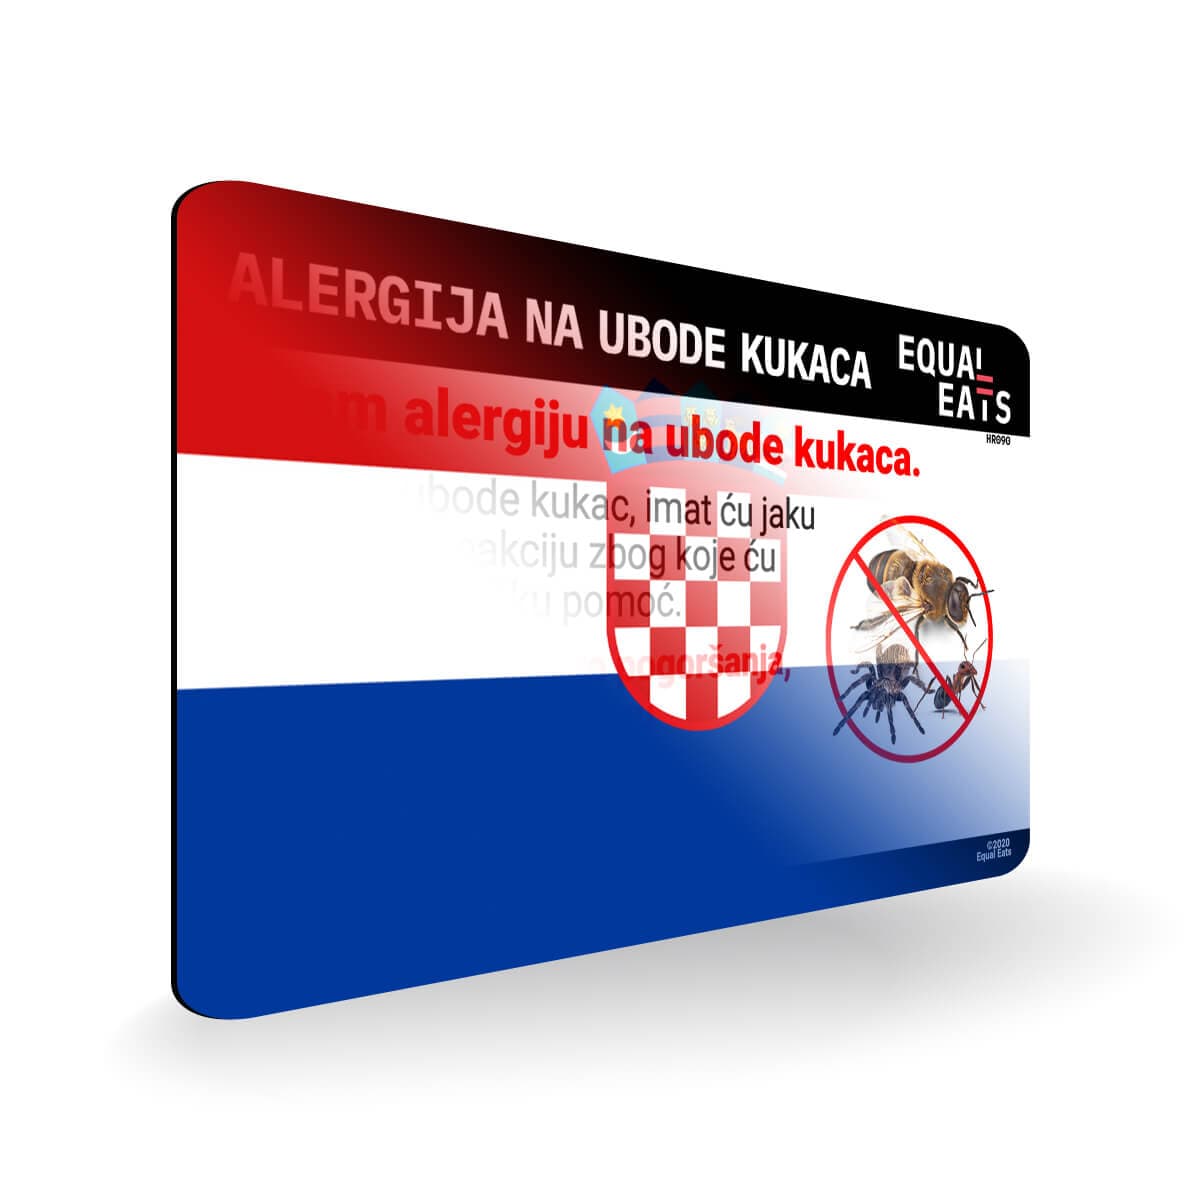 Insect Sting Allergy in Croatian. Bee Sting Allergy Card for Croatia